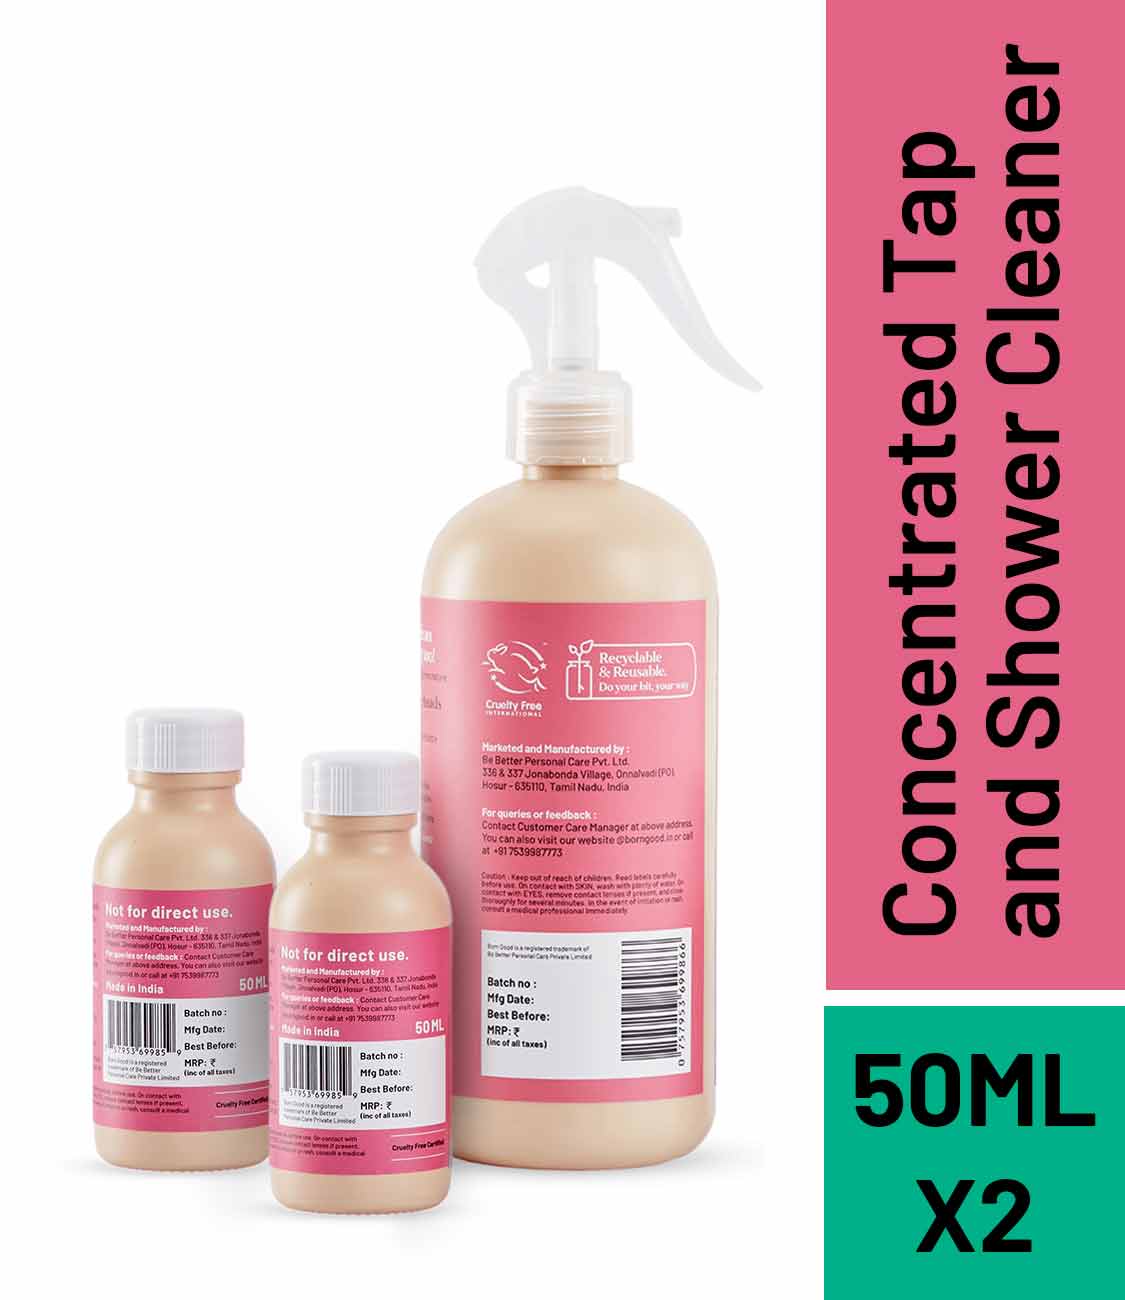 Born Good Plant-based Tap & Shower Cleaner Concentrate Kit (Makes 1 L)